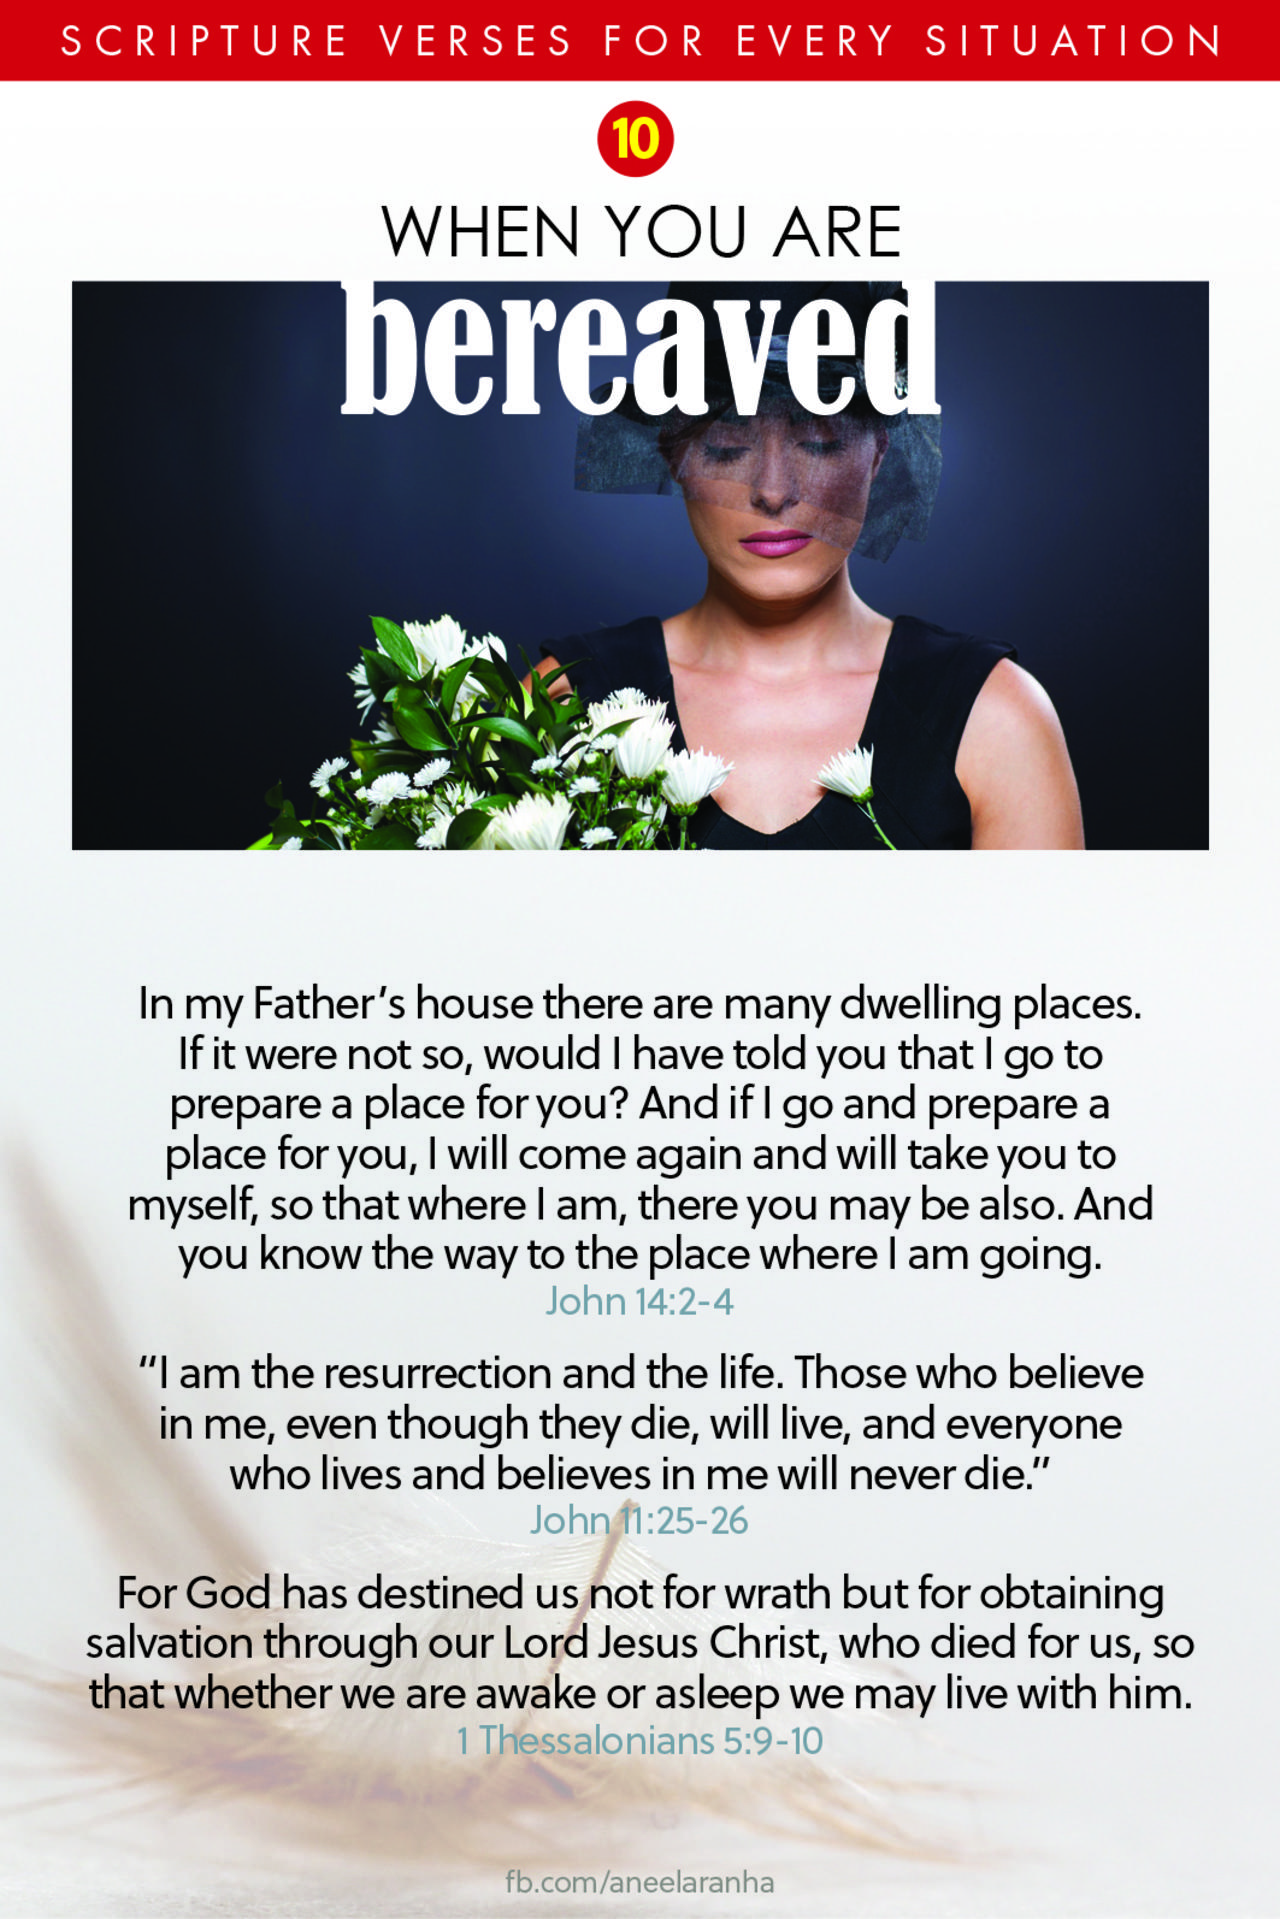 10. Are you bereaved?